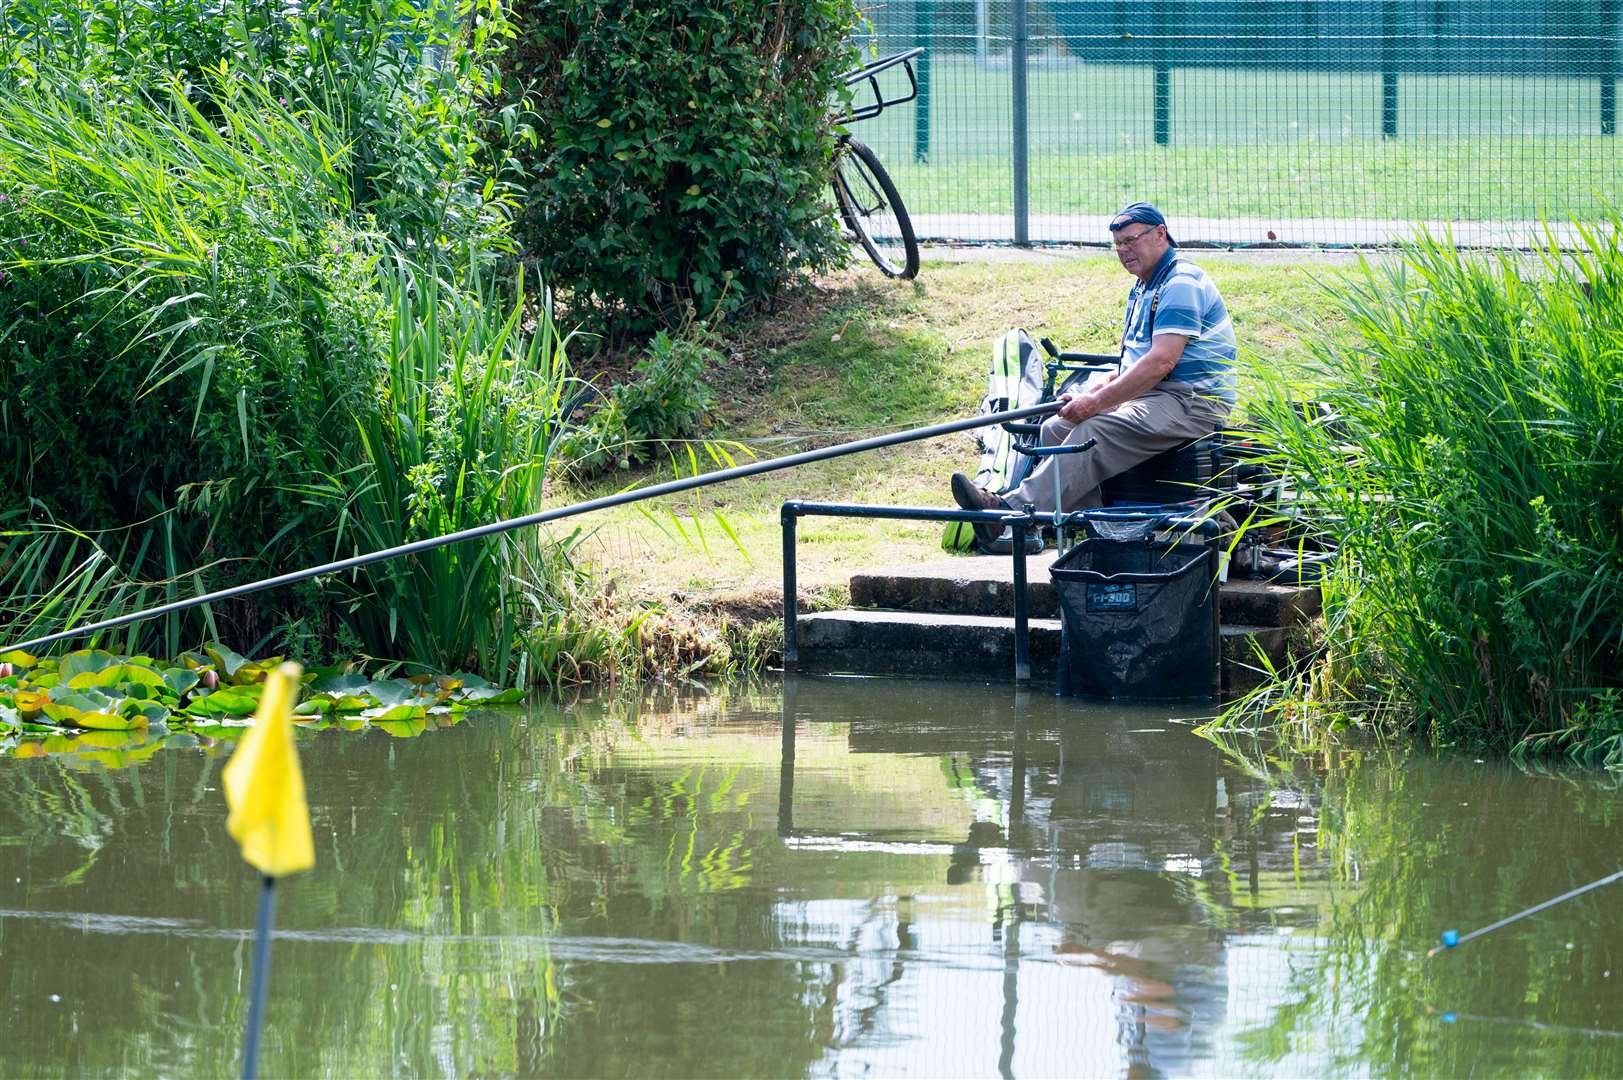 The West Norfolk Disabled Angling Club '97' memorial fishing match at Alive Lynnsport